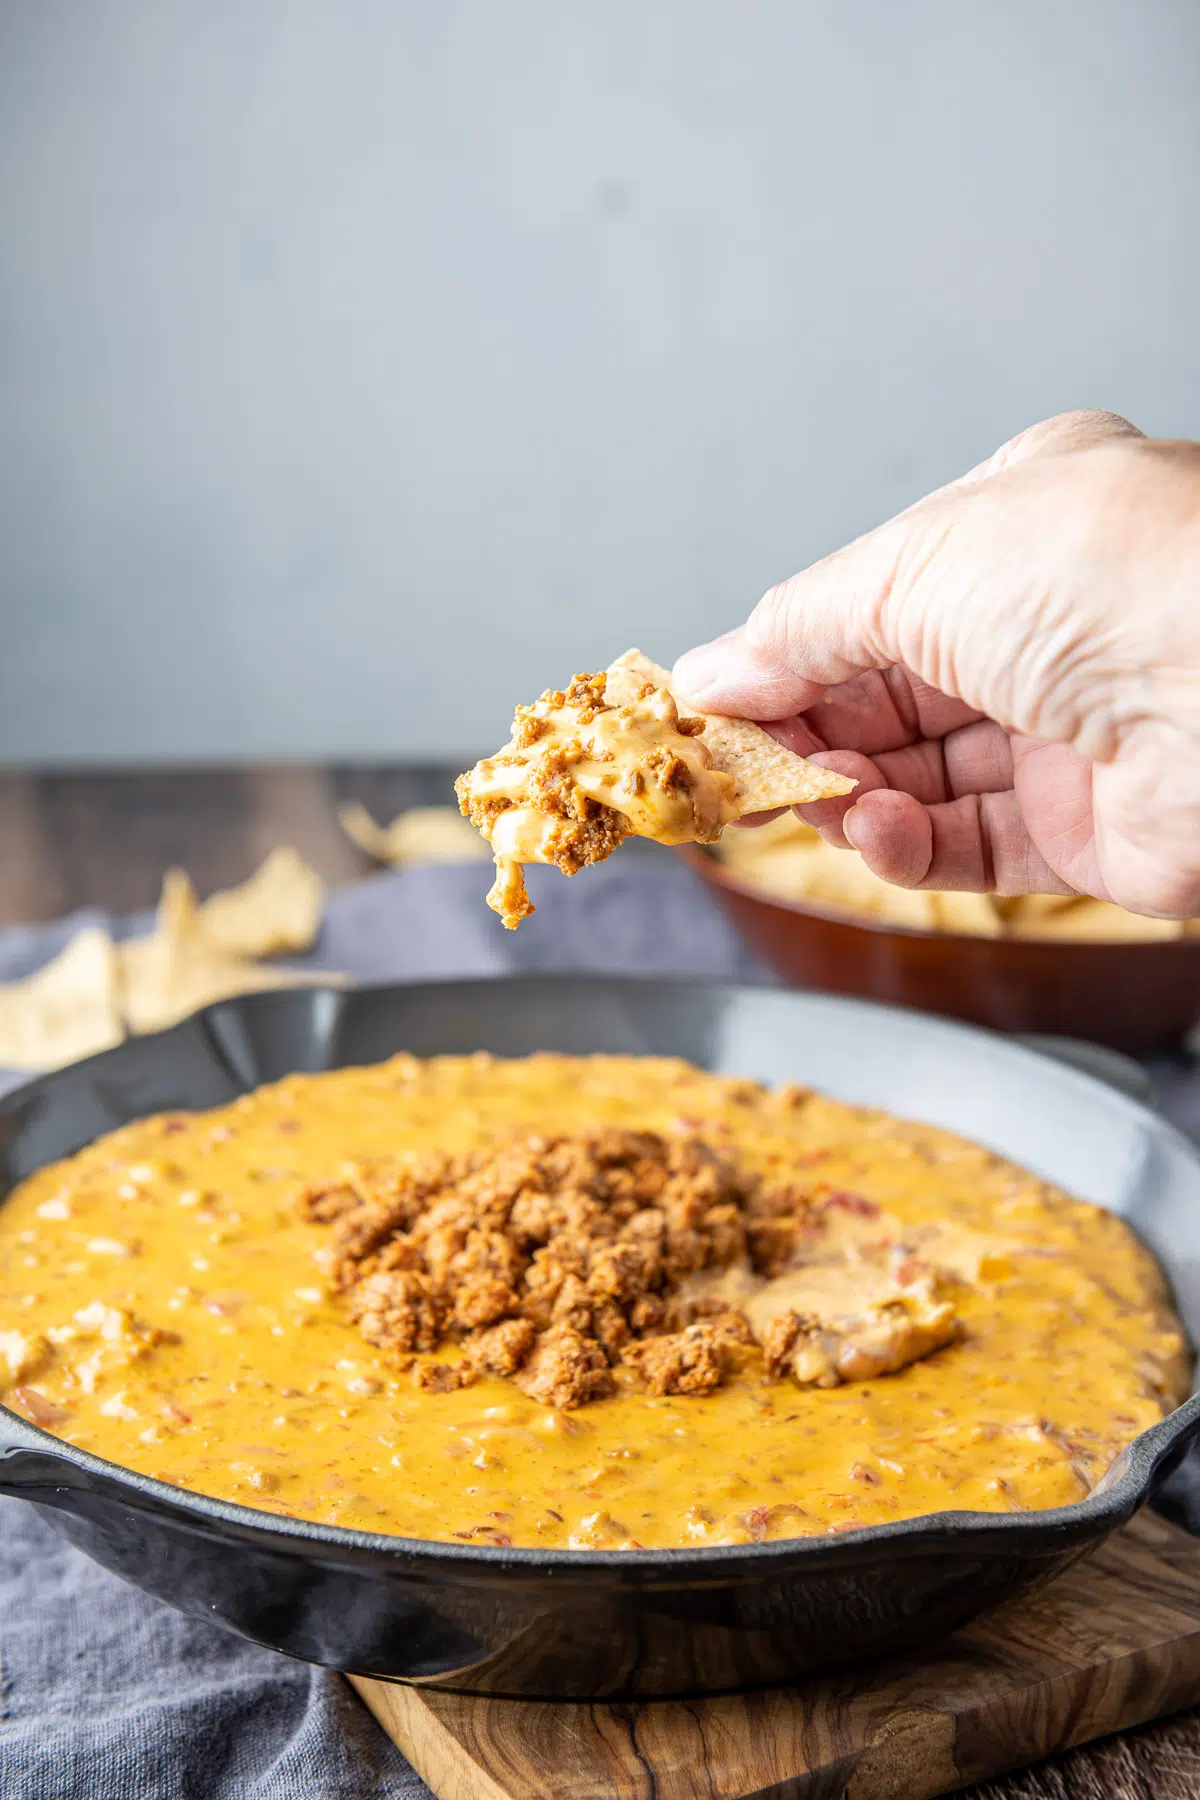 A hand holding a chip with the chorizo dip on it, held over the pan